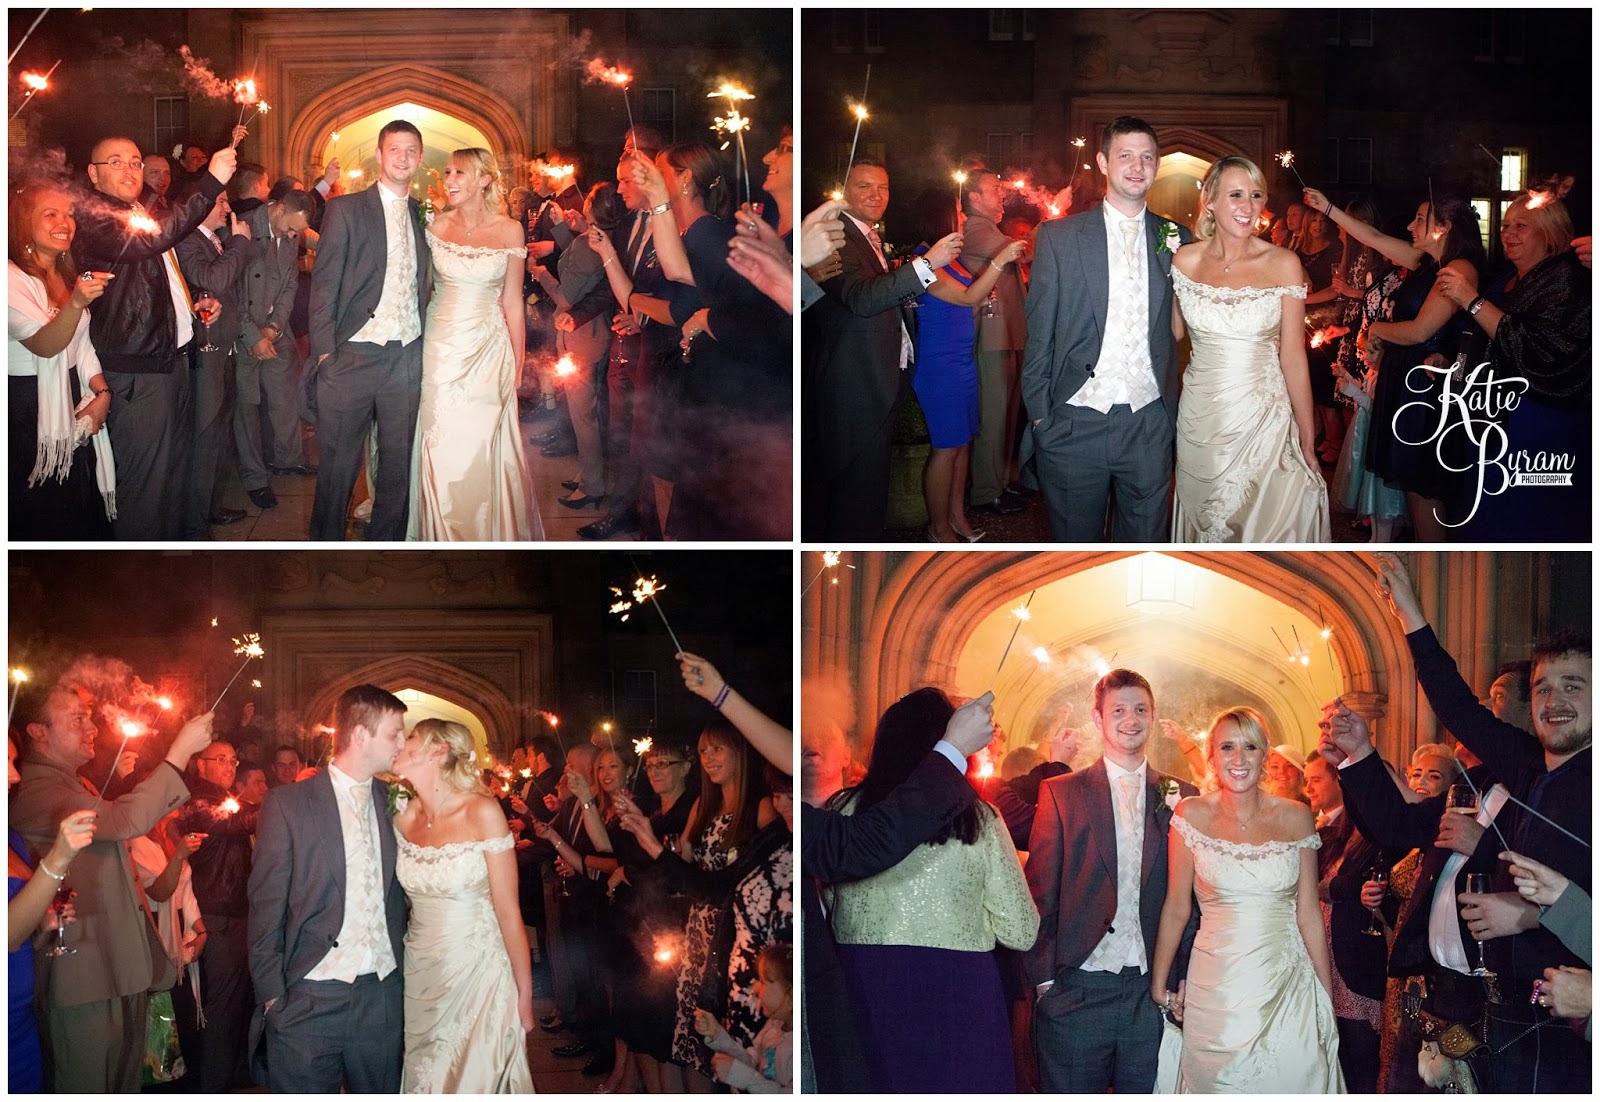 wedding sparklers, sparklers send off, matfen hall wedding, matfen wedding, northumberland wedding, katie byram photography, vintage wedding, quirky wedding photography, north east wedding, north east wedding venue, great hall matfen, event diva, by wendy, just perfect,